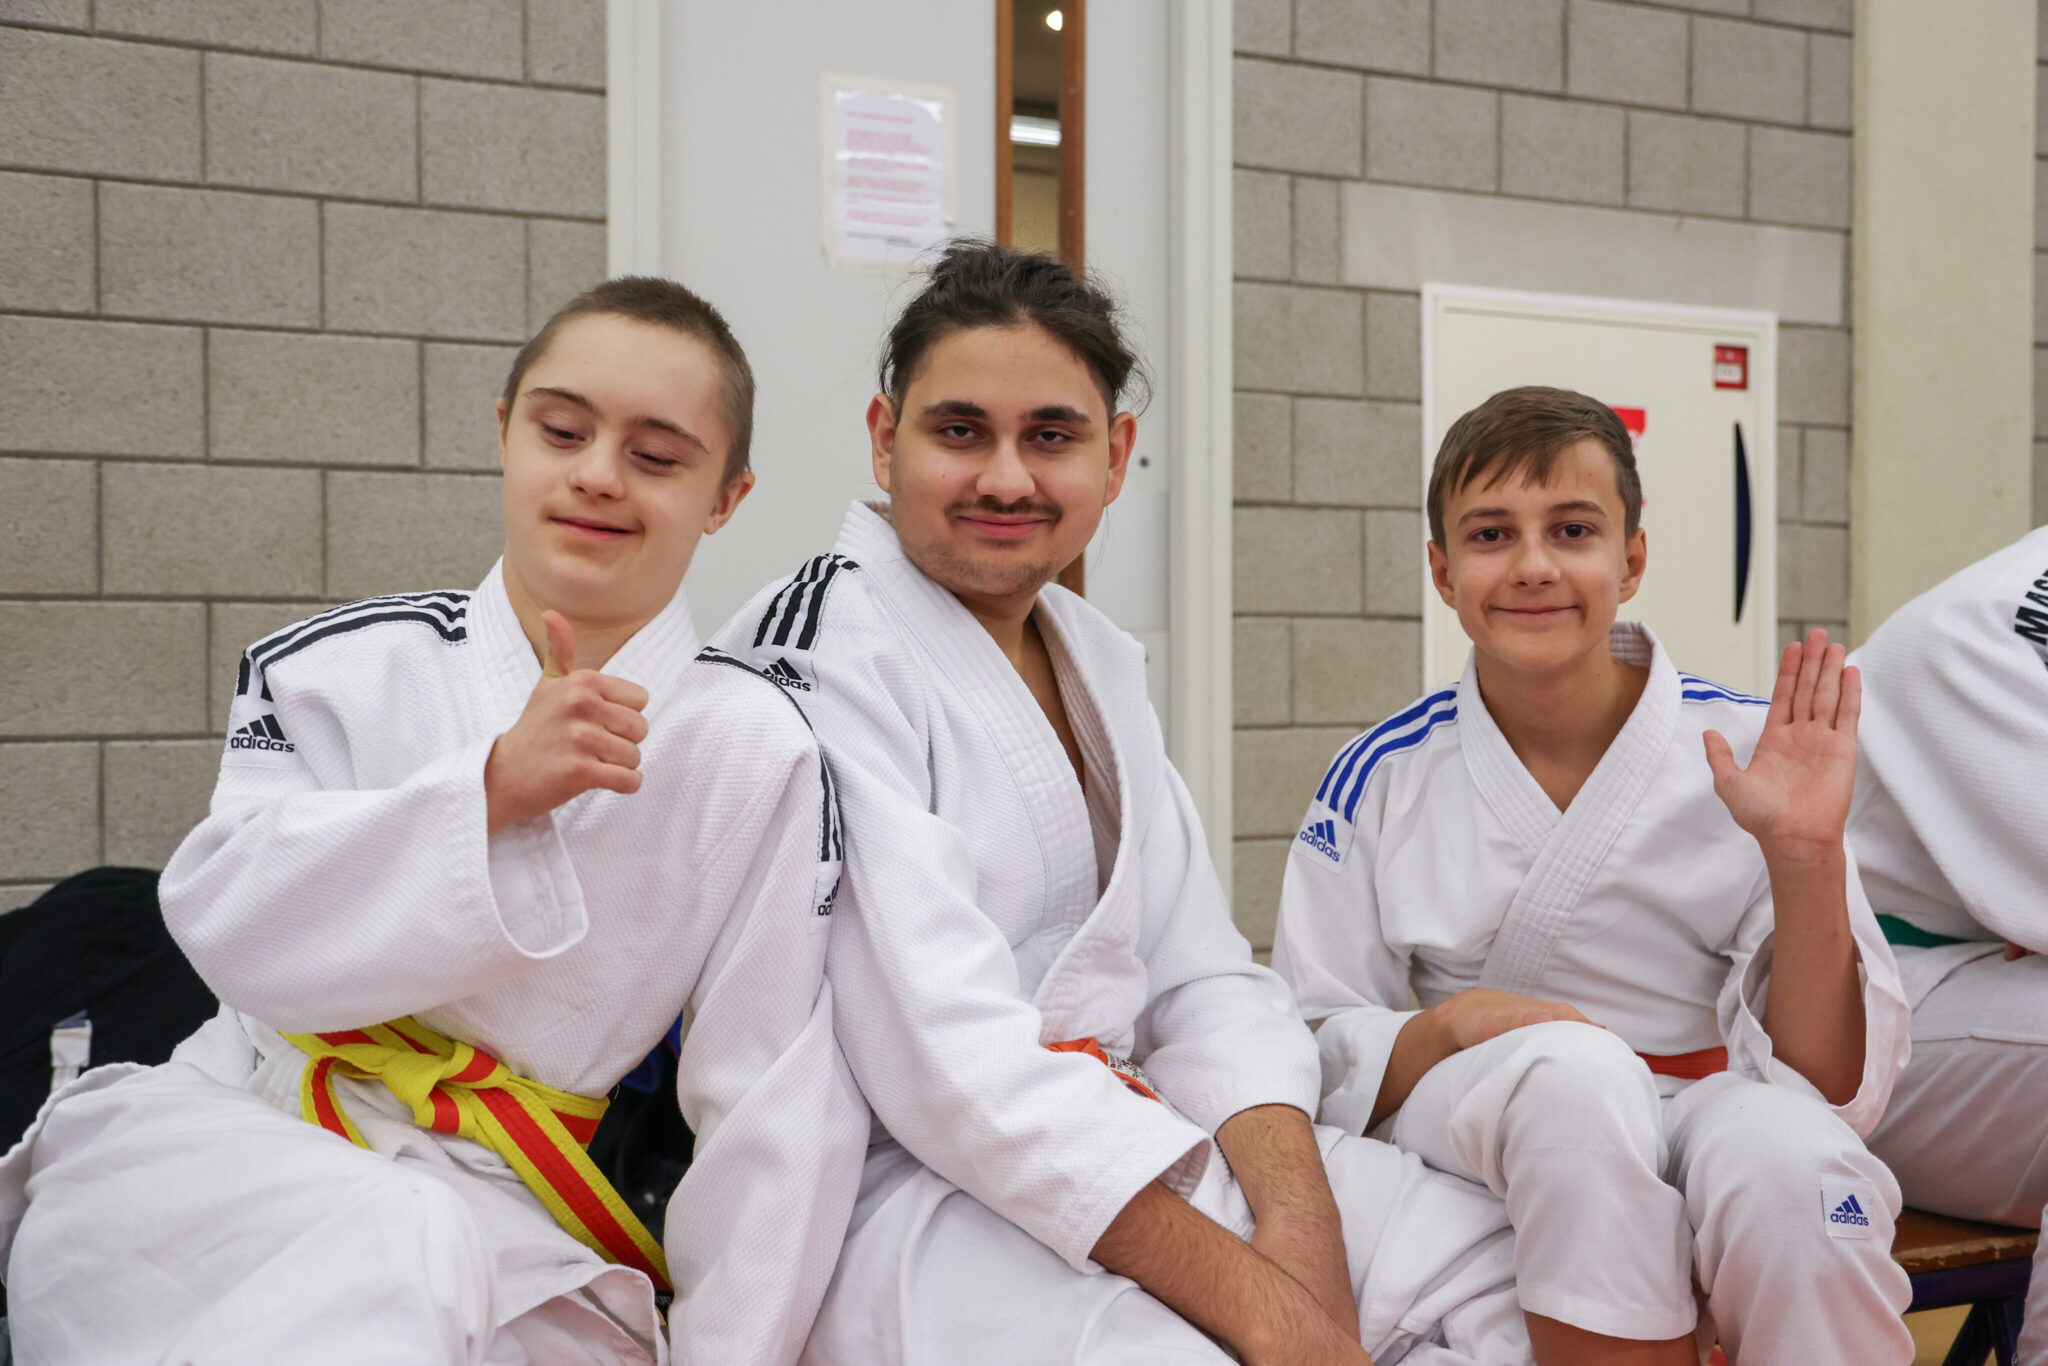 VENRAY IS ABOUT ALL ABILITIES TO DO JUDO